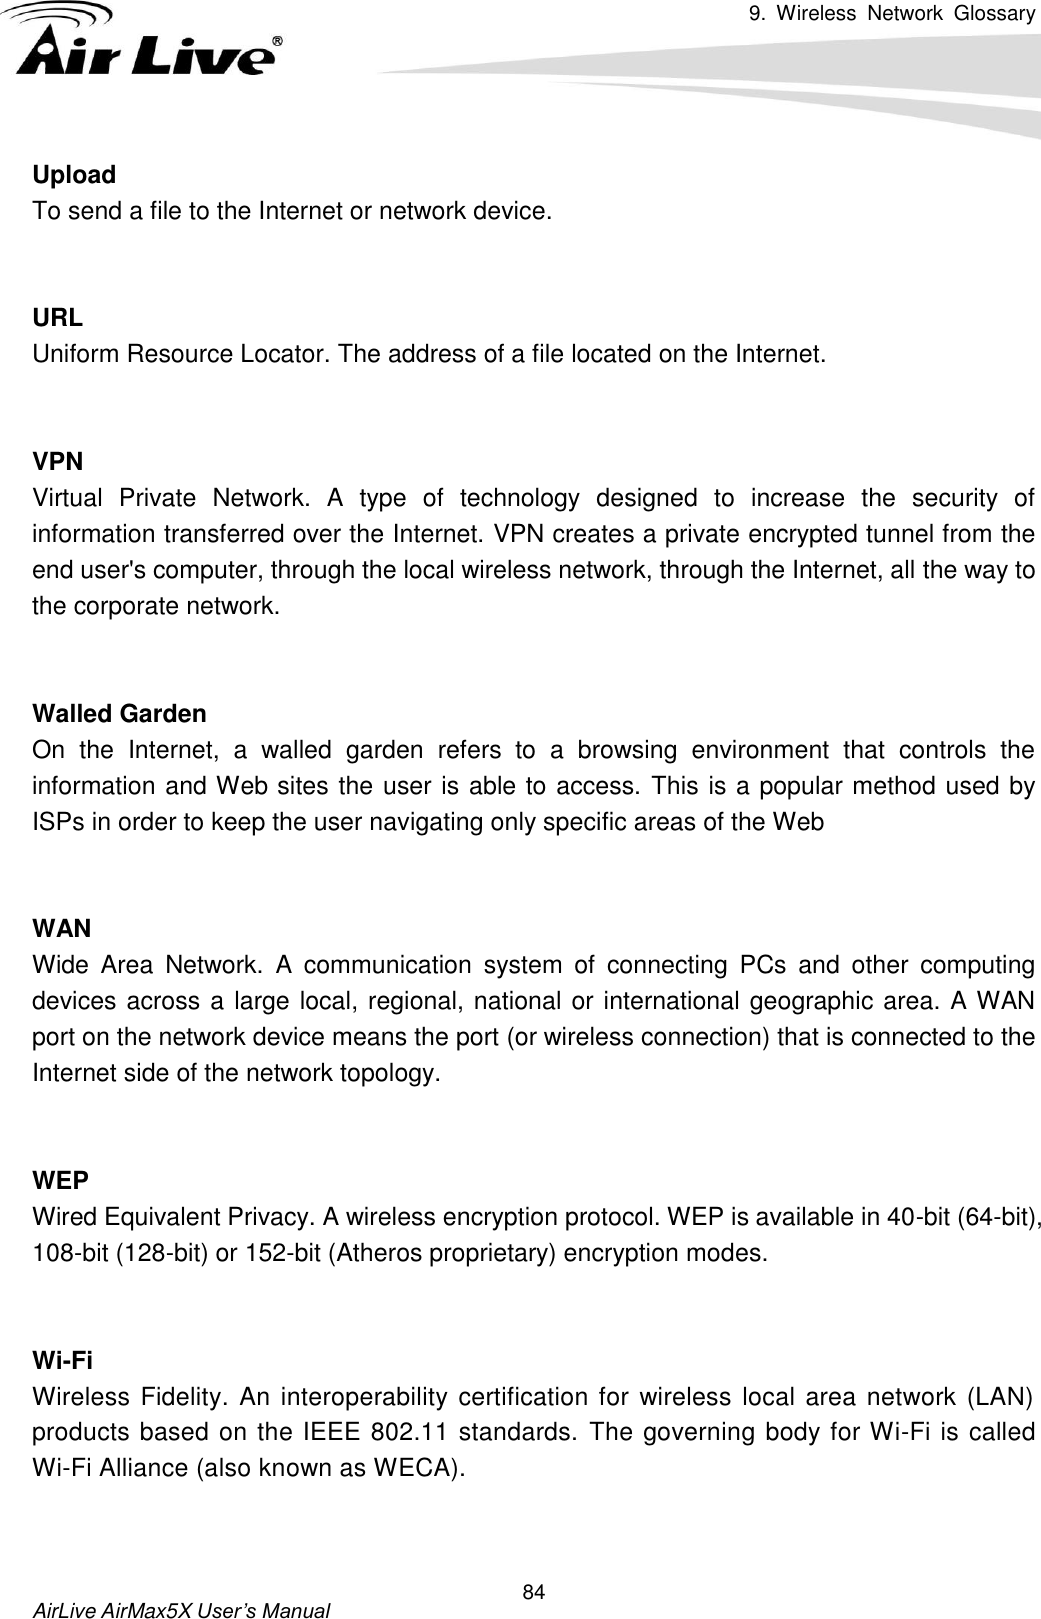 9.  Wireless  Network  Glossary       AirLive AirMax5X User’s Manual 84 Upload To send a file to the Internet or network device.   URL Uniform Resource Locator. The address of a file located on the Internet.   VPN   Virtual  Private  Network.  A  type  of  technology  designed  to  increase  the  security  of information transferred over the Internet. VPN creates a private encrypted tunnel from the end user&apos;s computer, through the local wireless network, through the Internet, all the way to the corporate network.   Walled Garden On  the  Internet,  a  walled  garden  refers  to  a  browsing  environment  that  controls  the information and Web sites the user is able to access. This is a popular method used by ISPs in order to keep the user navigating only specific areas of the Web   WAN Wide  Area  Network.  A  communication  system  of  connecting  PCs  and  other  computing devices across a large local, regional, national or international geographic area. A WAN port on the network device means the port (or wireless connection) that is connected to the Internet side of the network topology.   WEP   Wired Equivalent Privacy. A wireless encryption protocol. WEP is available in 40-bit (64-bit), 108-bit (128-bit) or 152-bit (Atheros proprietary) encryption modes.     Wi-Fi   Wireless Fidelity. An interoperability certification for wireless local area network (LAN) products based on the IEEE 802.11 standards. The governing body for Wi-Fi is called Wi-Fi Alliance (also known as WECA).   